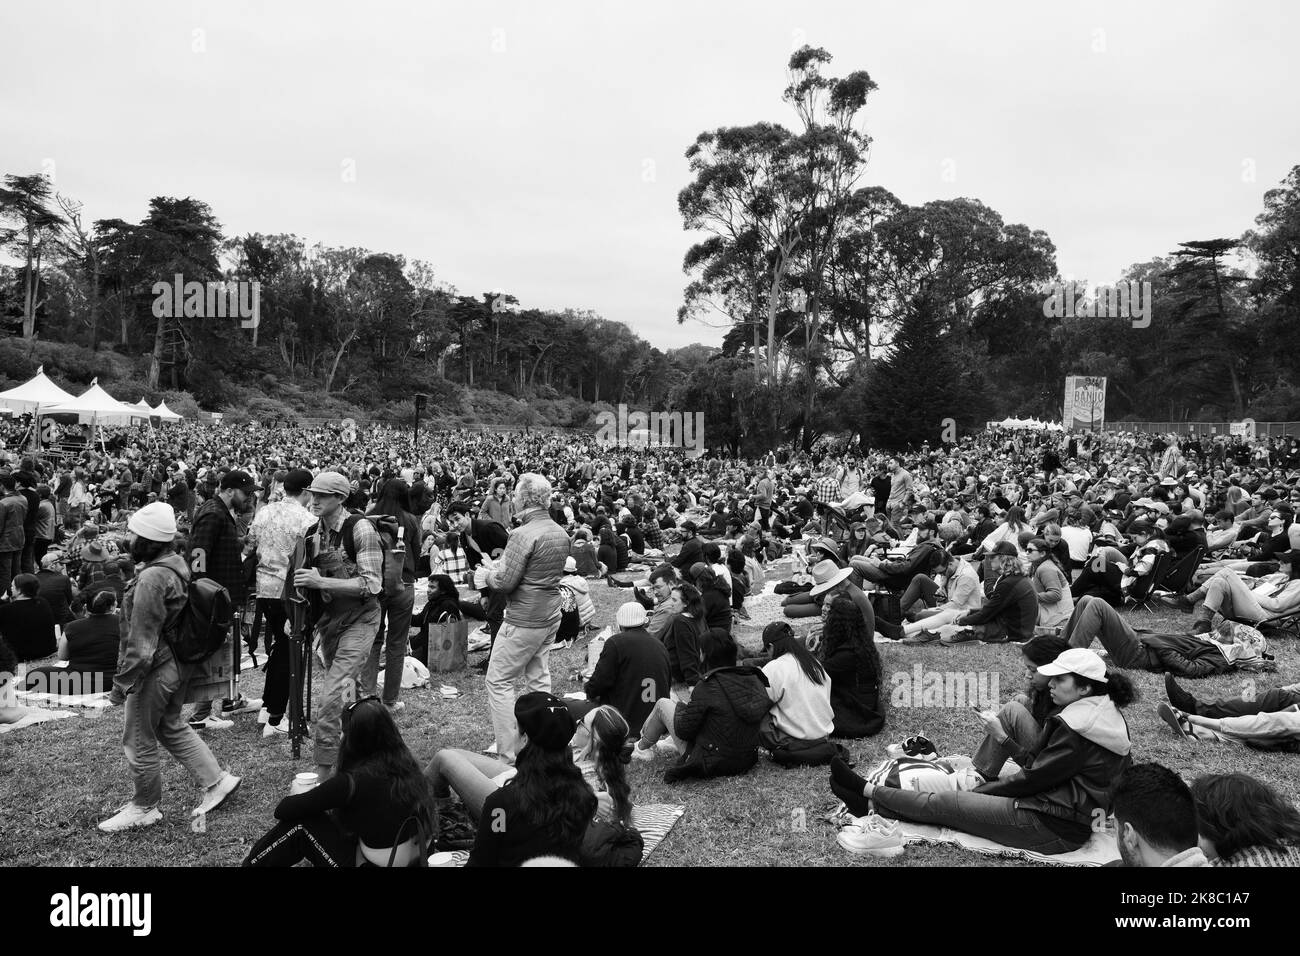 Crowd at the Hardly Strictly Bluegrass music festival at Golden Gate Park, San Francisco, California, USA; annual outdoor concert held in October. Stock Photo